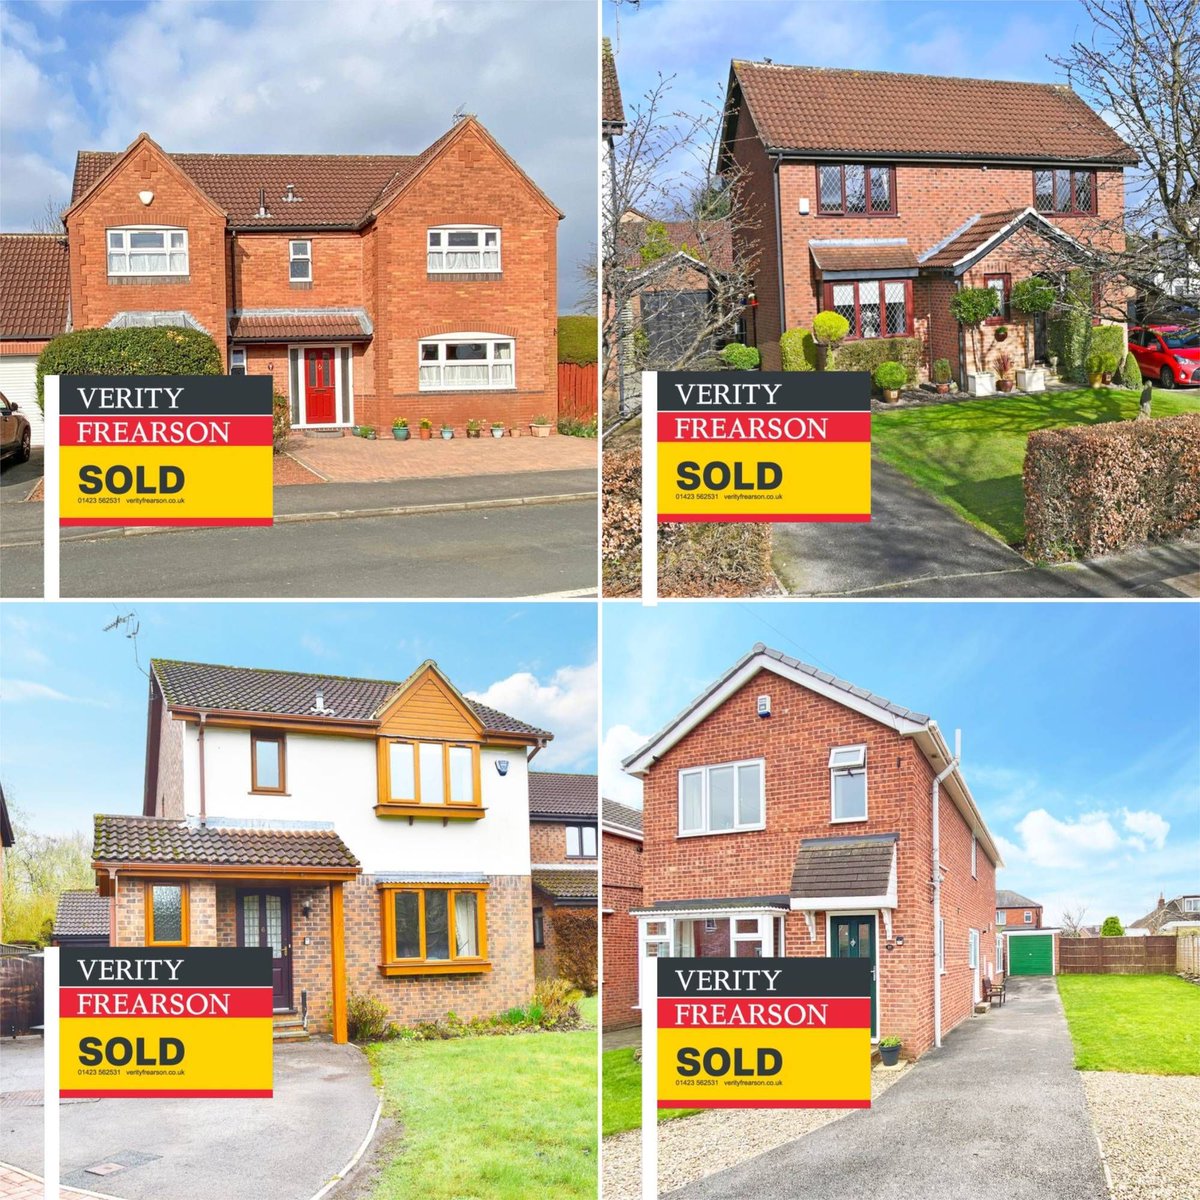 🏡 4 great properties sold within the first 4 weeks of marketing!

☎️ To discuss selling your home, call our sales team on 01423 562531.

#harrogate #knaresborough #property #sstc #sellyourhome #theharrogateagent #estateagent #topsellingagent
buff.ly/3lgOEeB